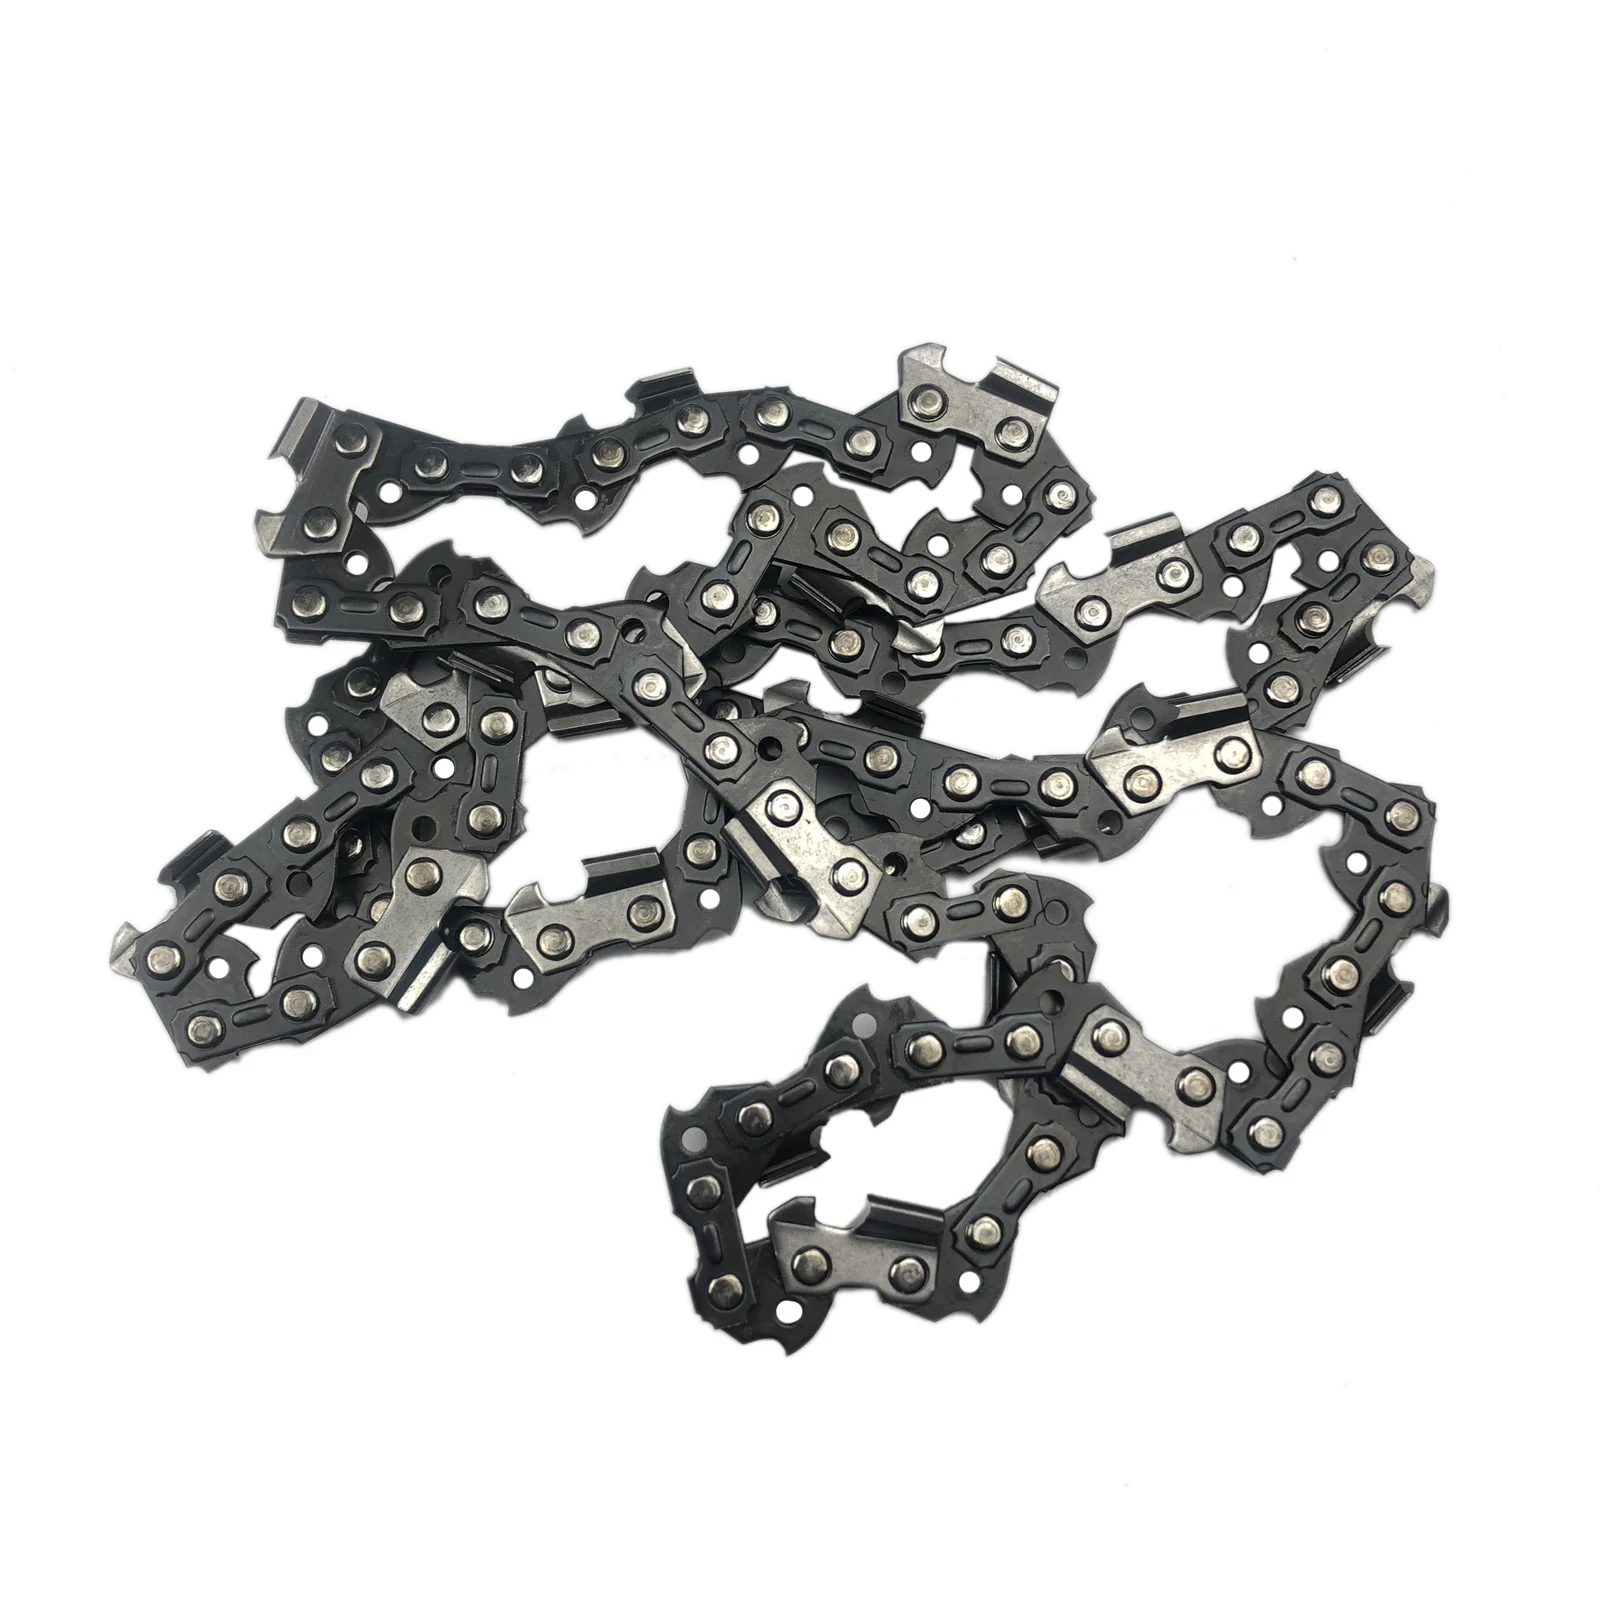 

1pc Saw Chain Tool Steel 92cm 50 Sections Fit For STIHL MS170 MS180 MS181 MS190 MS191T MS192T MS200 MS200T durable high quality